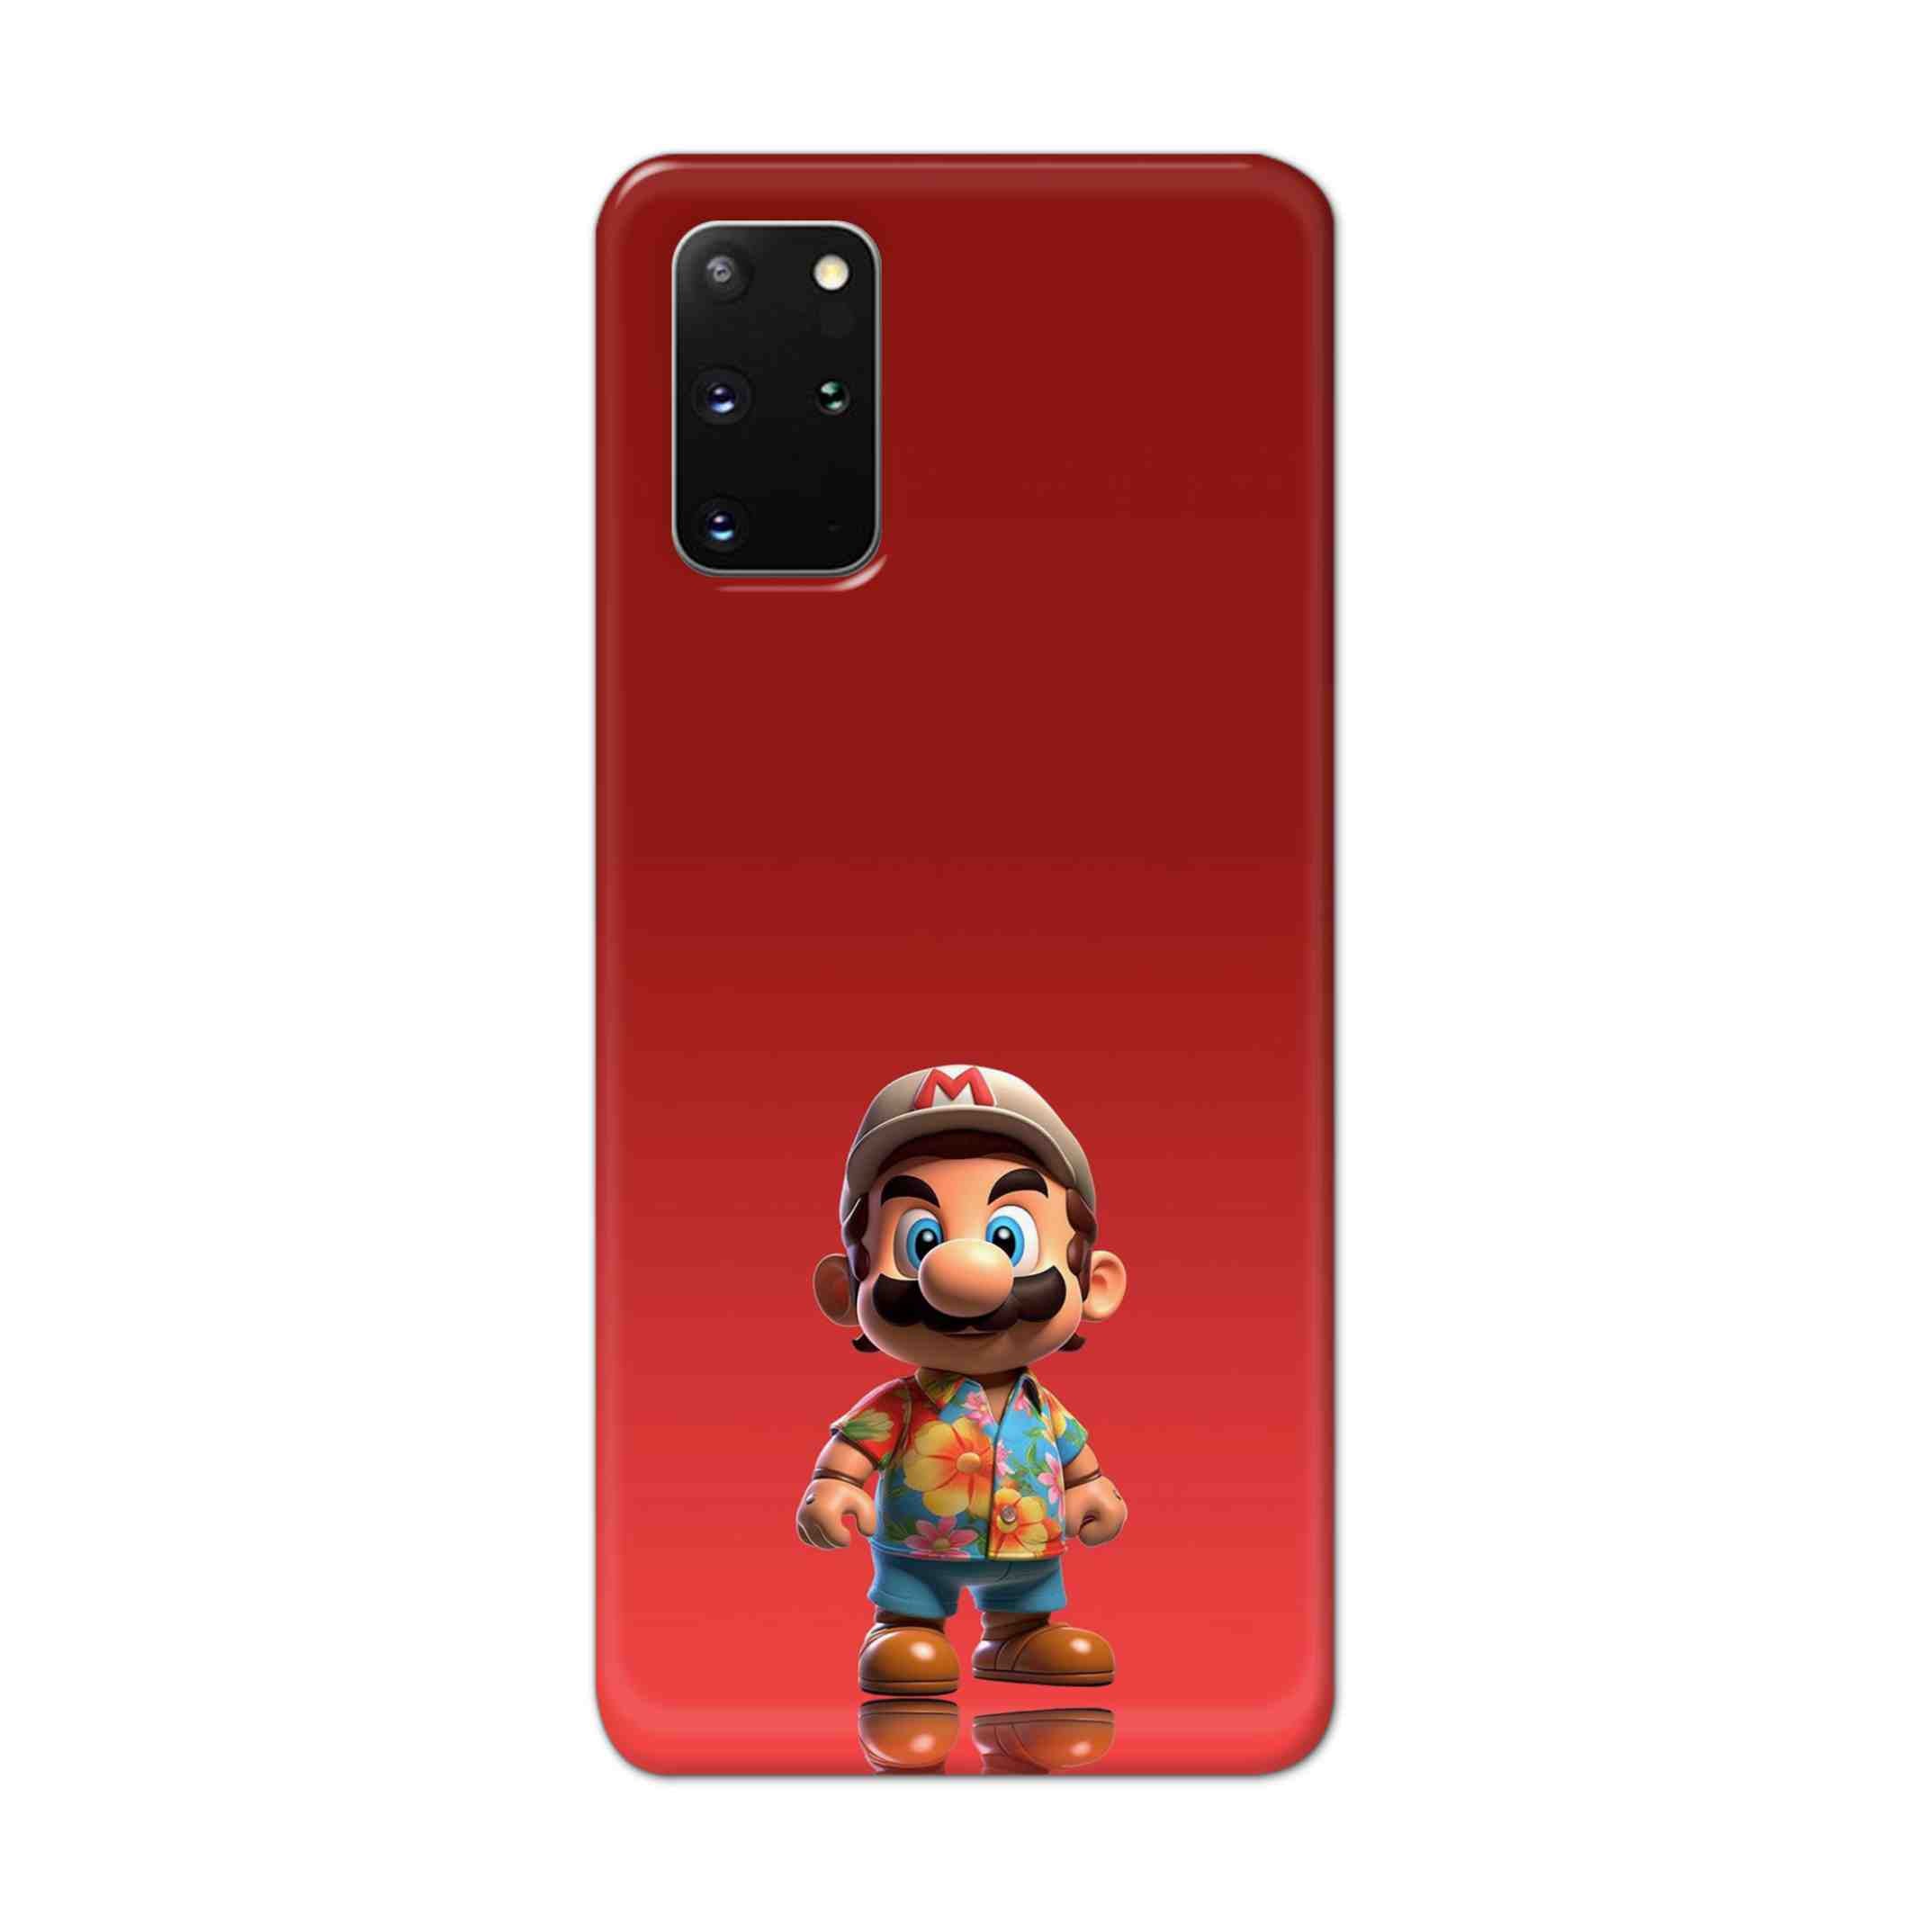 Buy Mario Hard Back Mobile Phone Case Cover For Samsung Galaxy S20 Plus Online